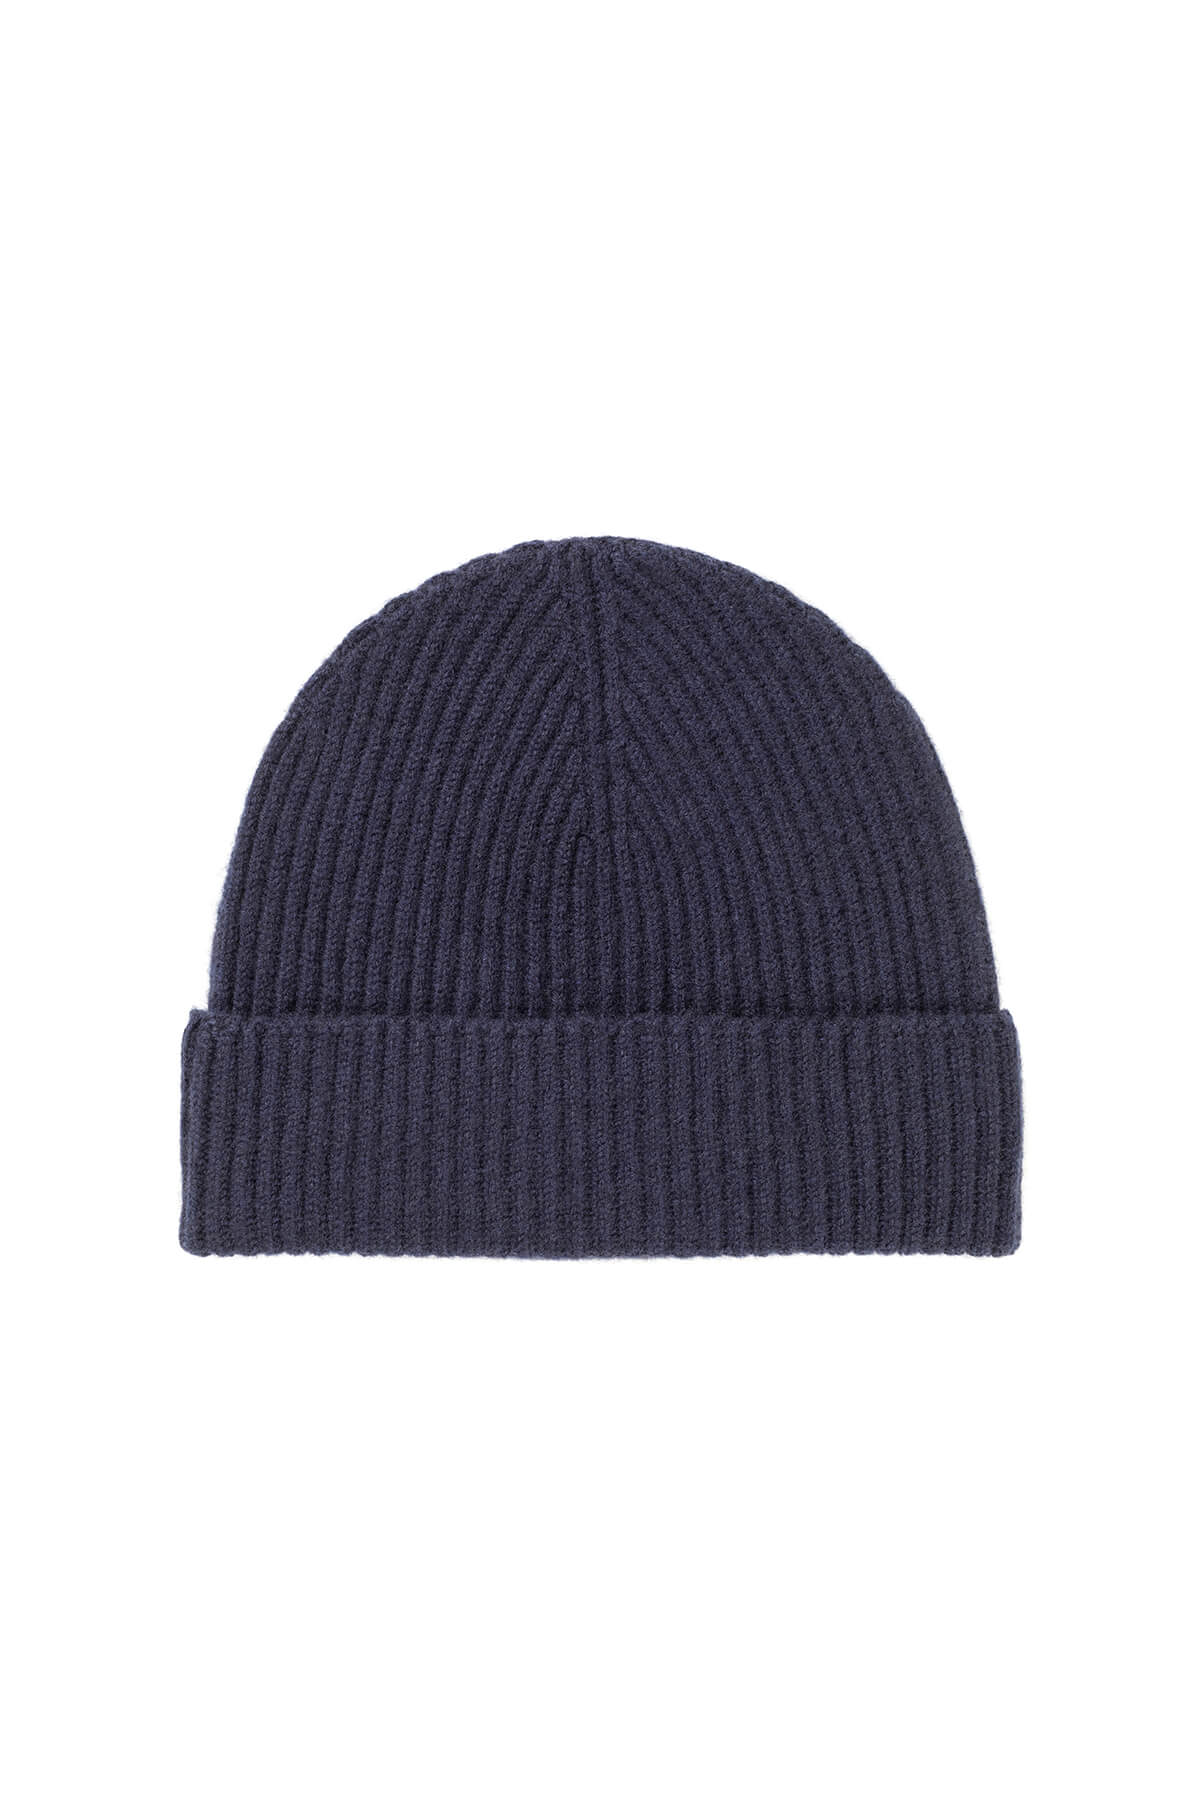 Johnstons of Elgin’s Navy Cashmere Ribbed Hat on white background HAA03320SD0707